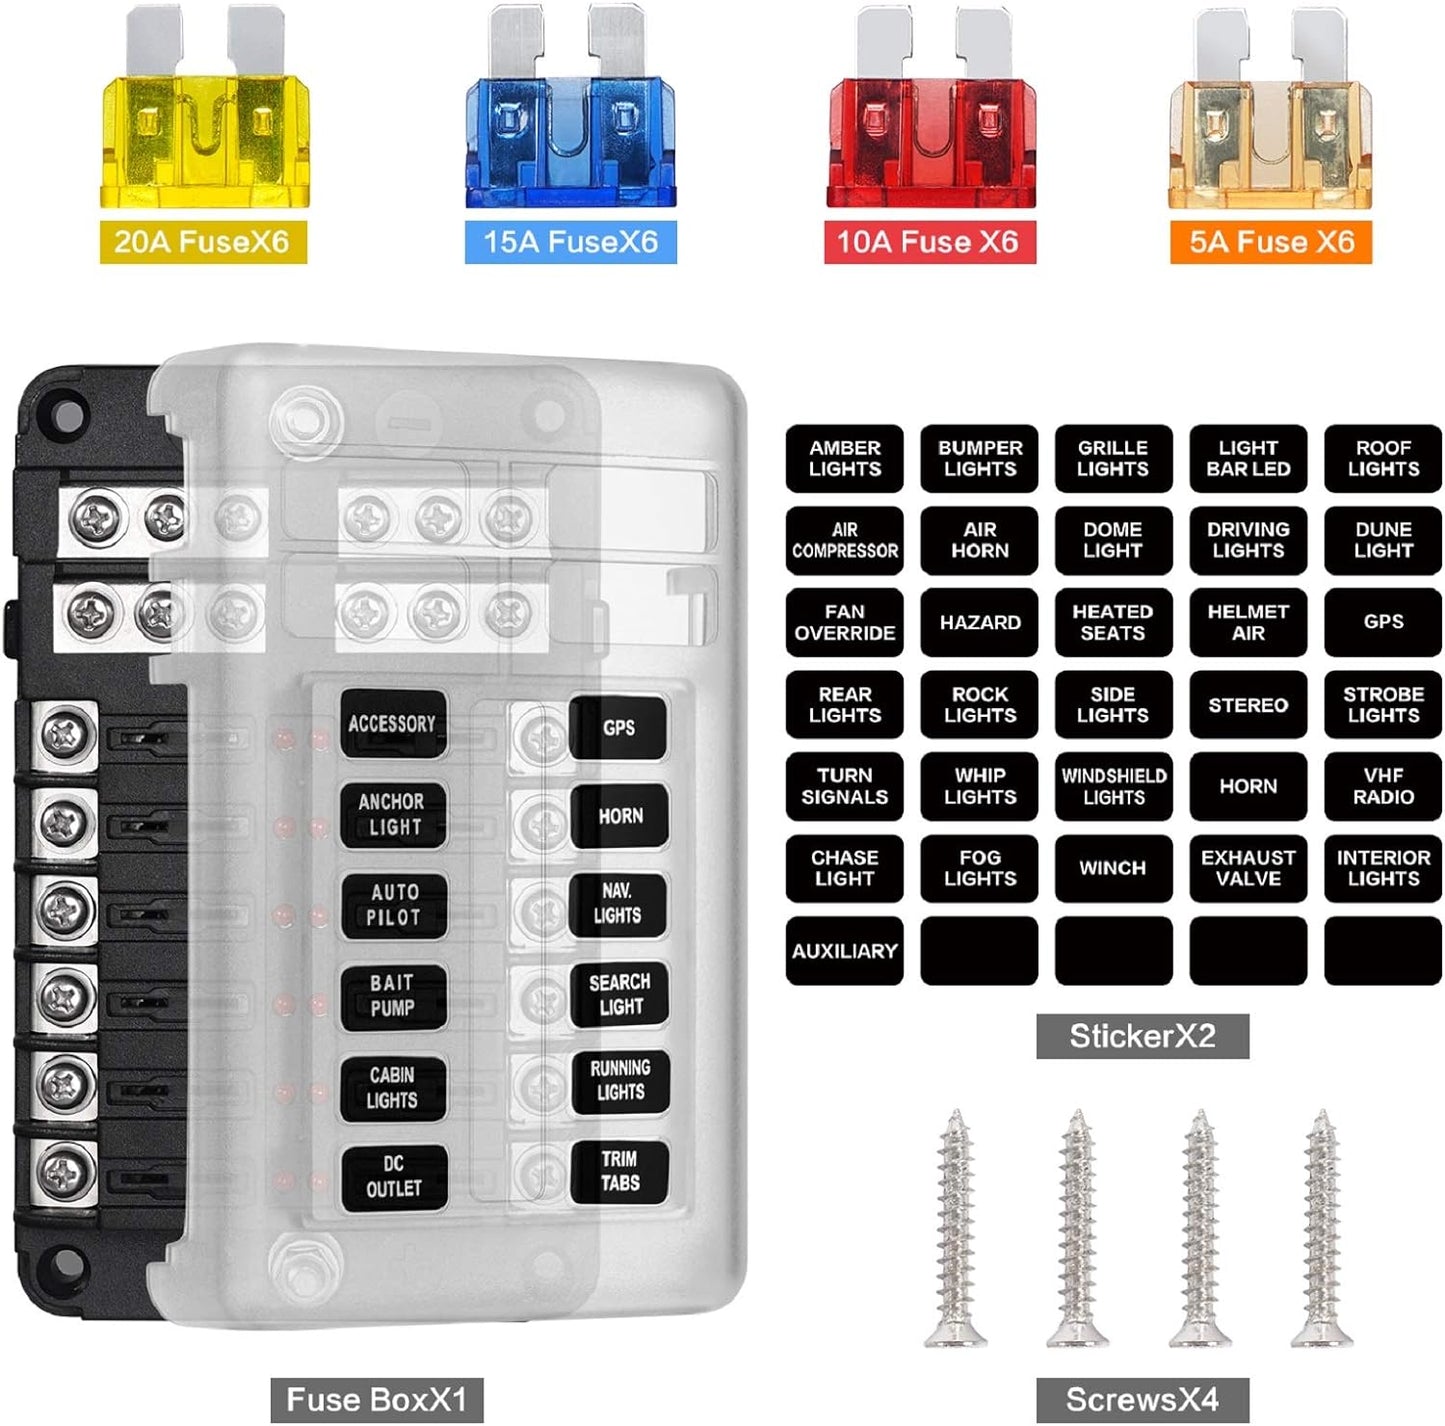 12 Way 12V Blade Fuse Block,12 Circuit ATC/ATO Fuse Box Holder with LED Indicator Waterpoof Cover for 12V/24V Automotive Truck Boat Marine RV Van Vehicle (With 16 Pcs Fuse)